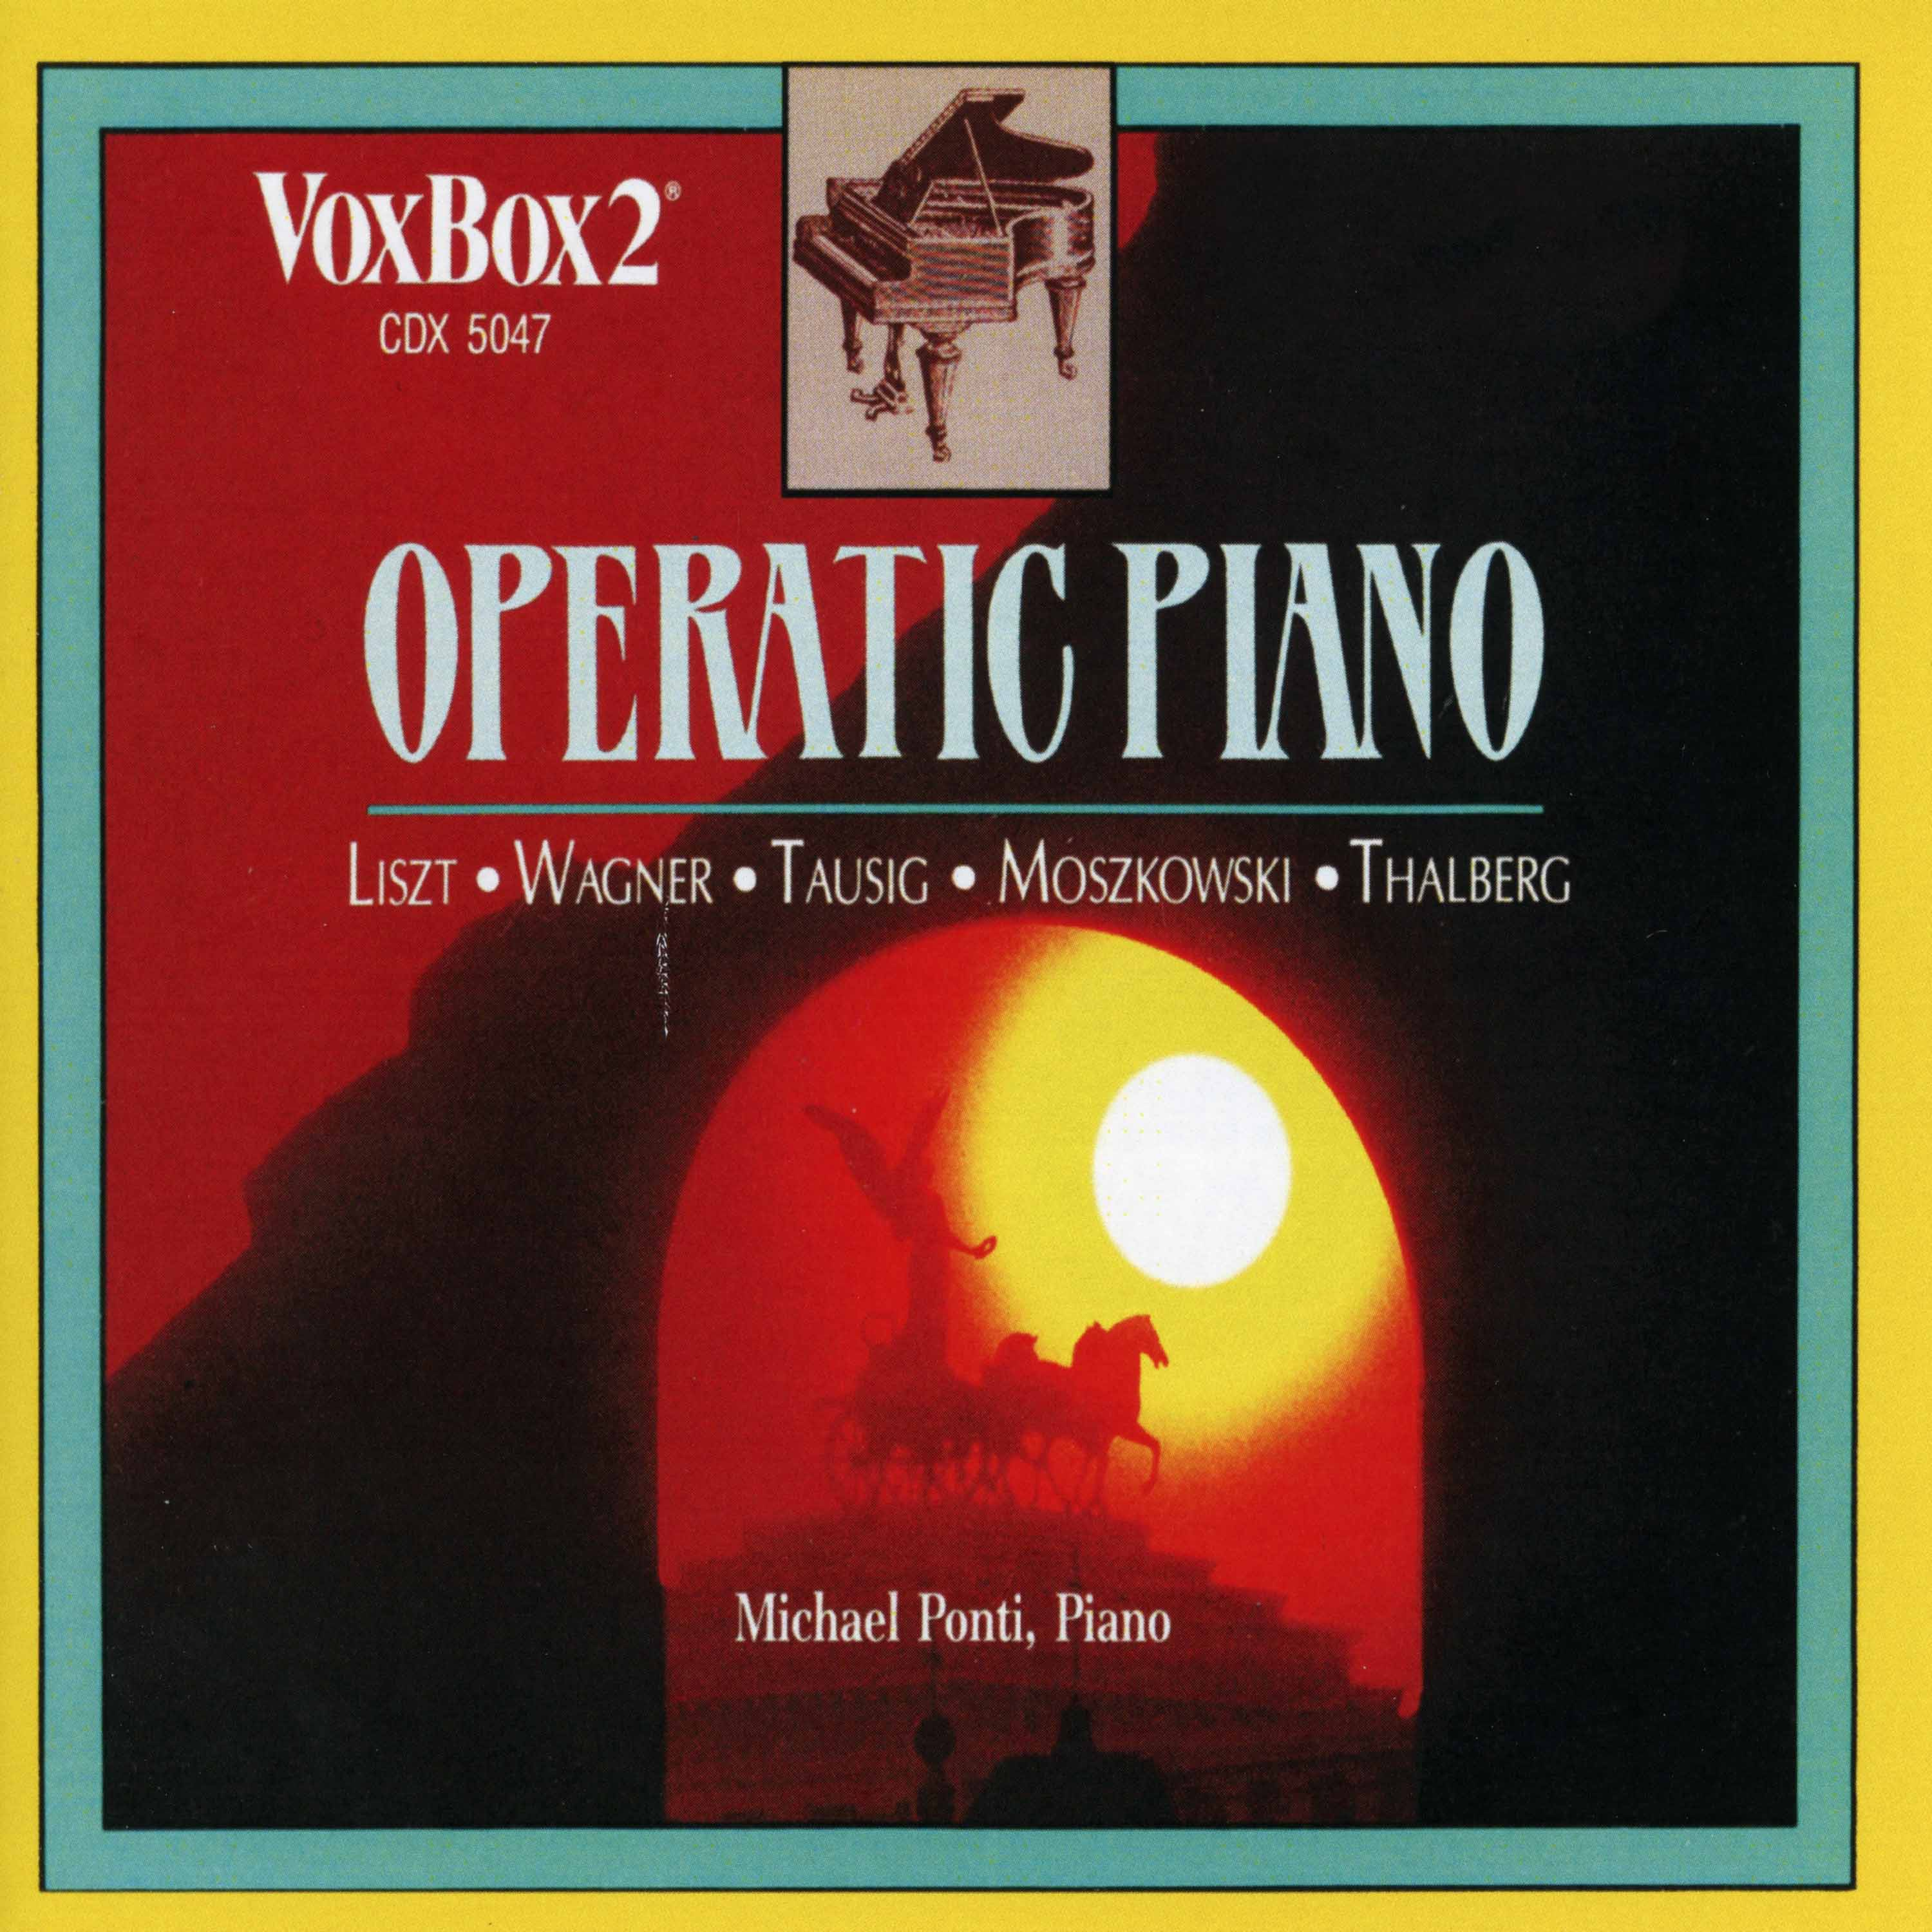 Fantasias and variations on Robert le diable, Op. 6:Fantasias & Variations on Robert le diable, Op. 6